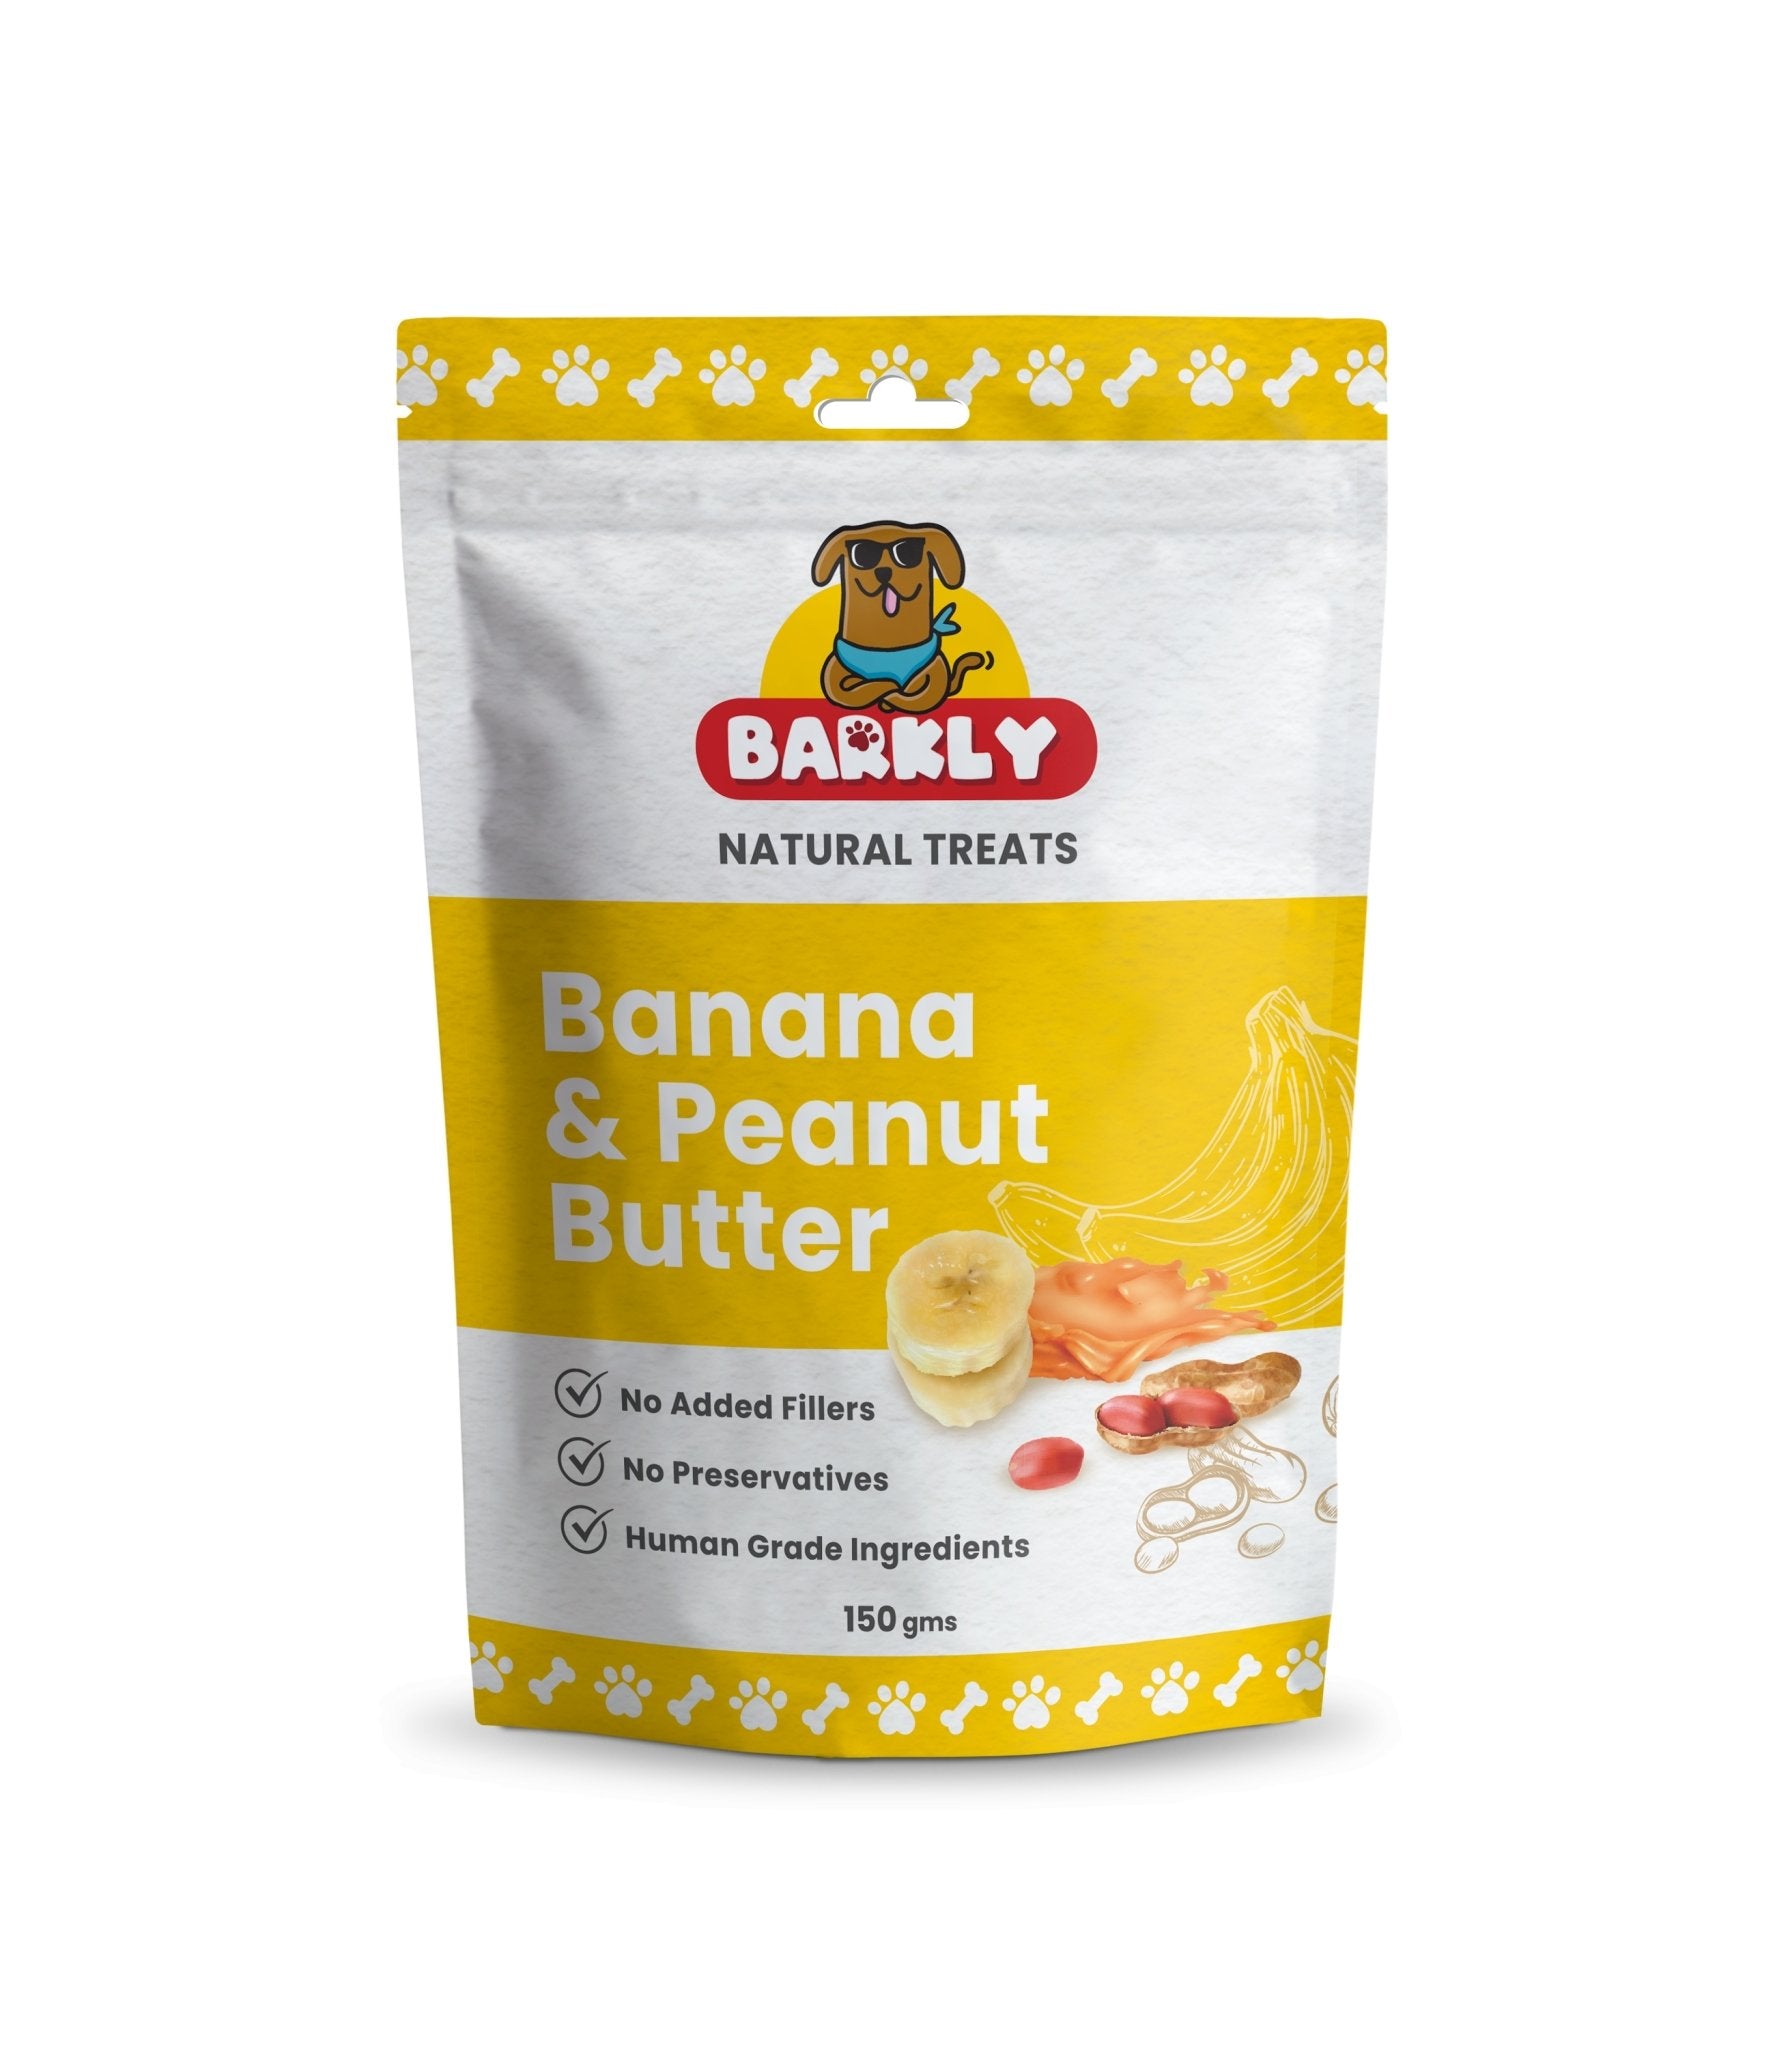 Dog treat product with banana and peanut butter combination